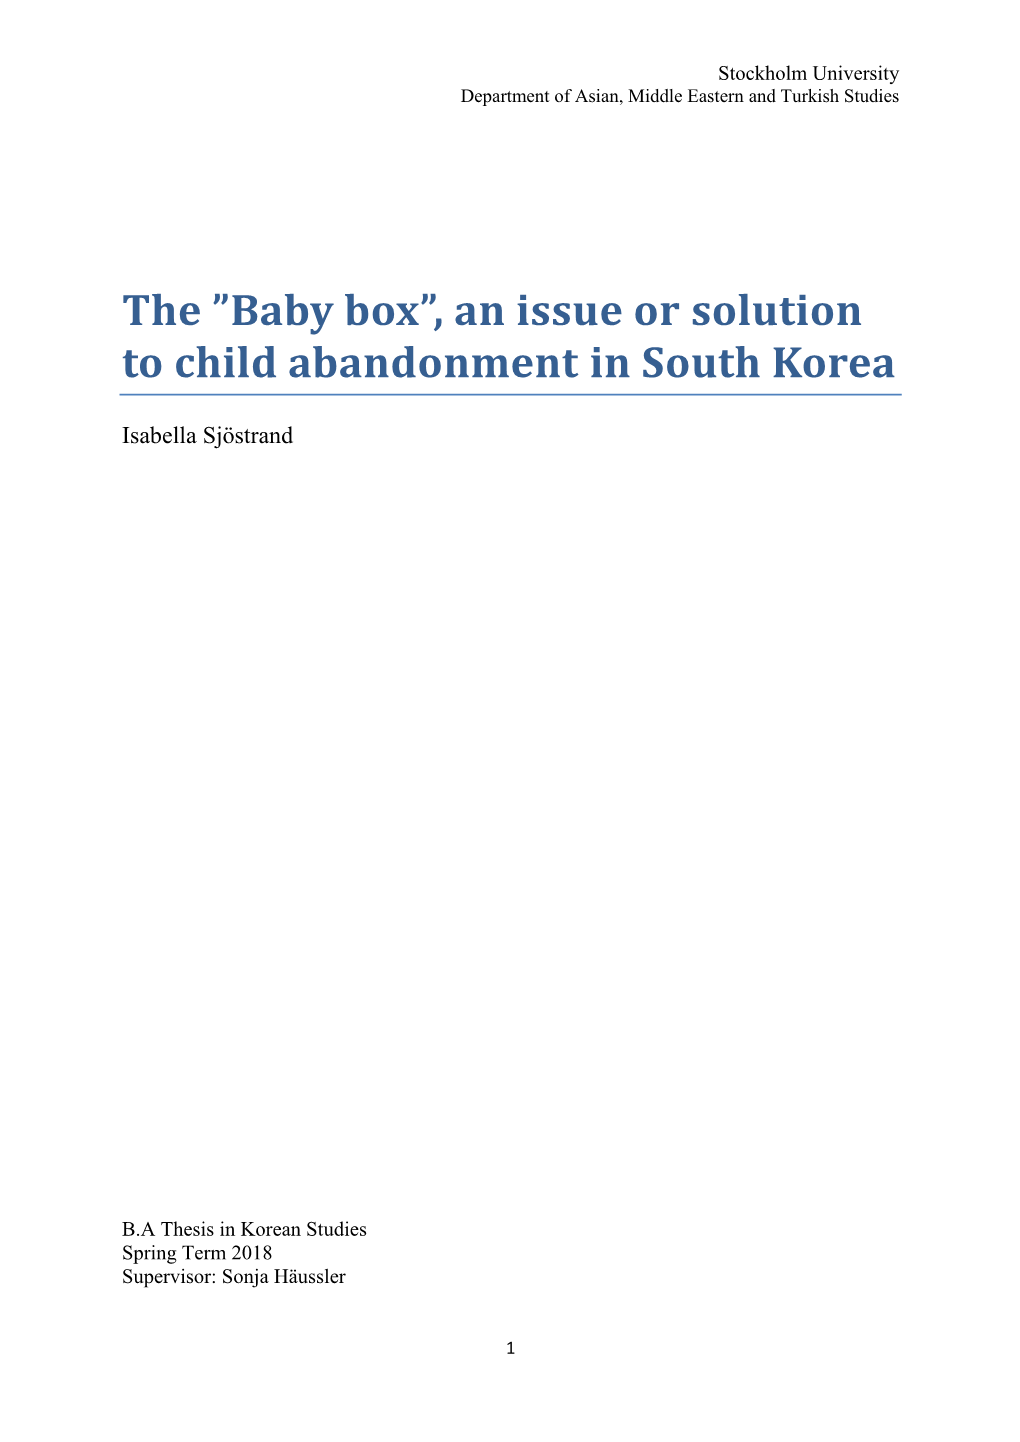 Baby Box”, an Issue Or Solution to Child Abandonment in South Korea